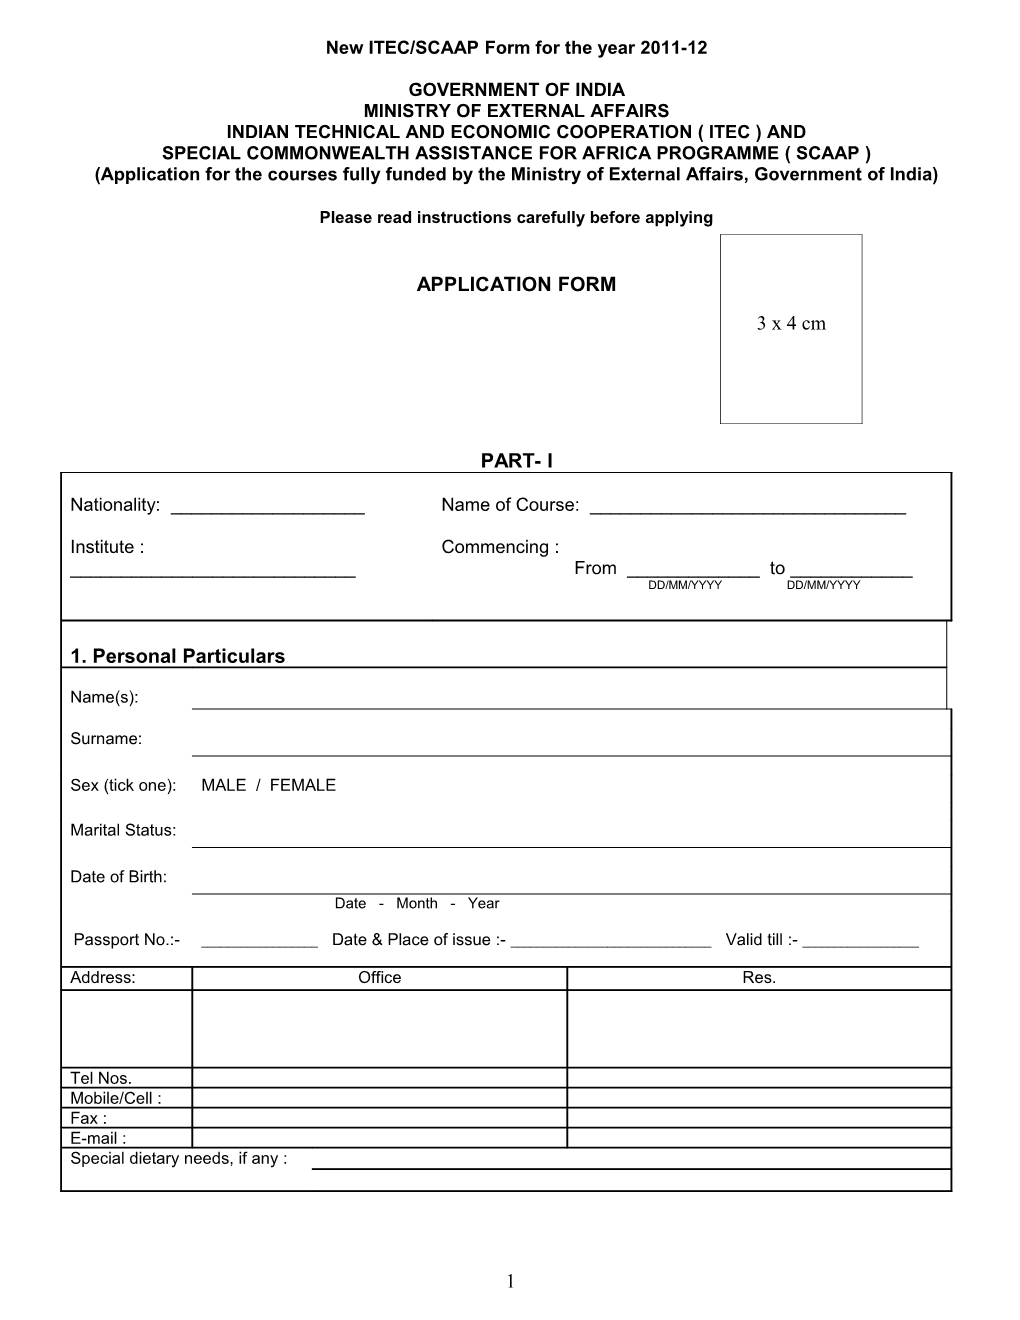 New ITEC/SCAAP Form for the Year 2008-09